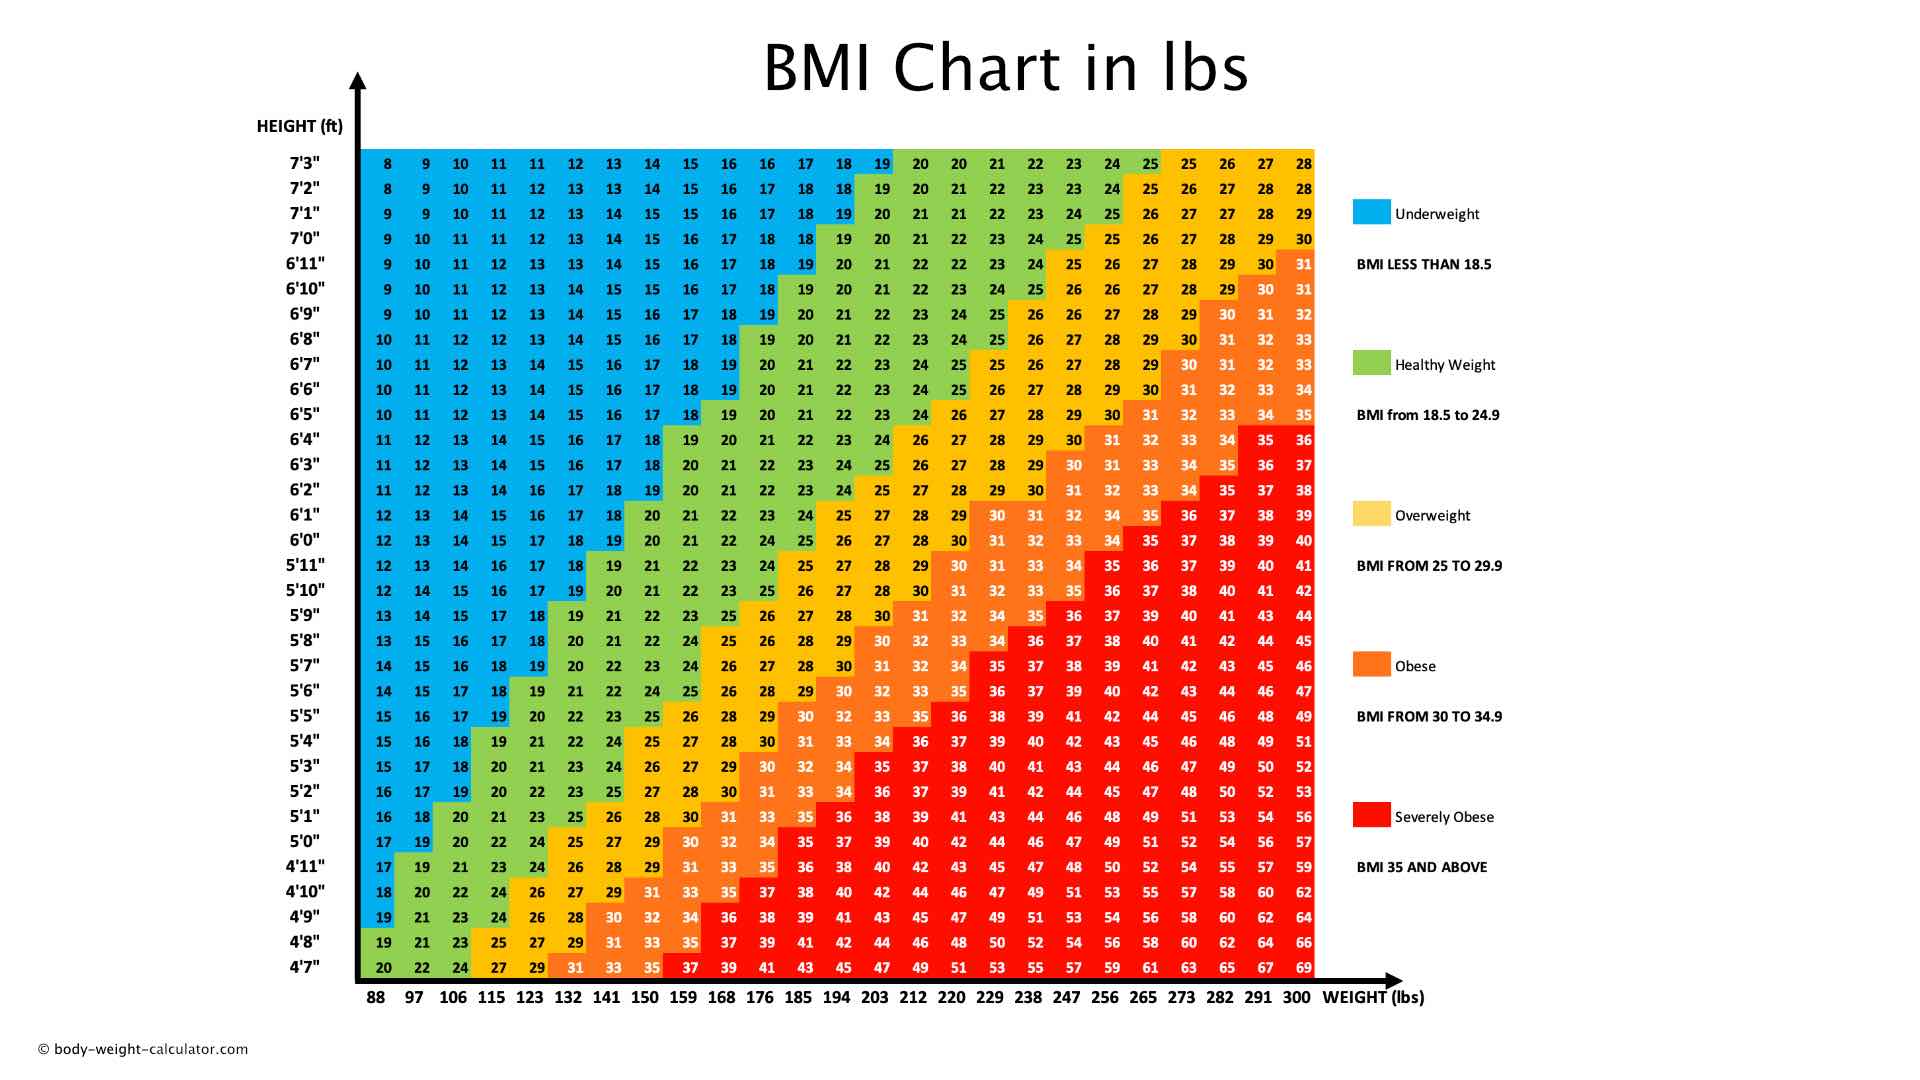 BMI chart for females by age in the United States - 2022